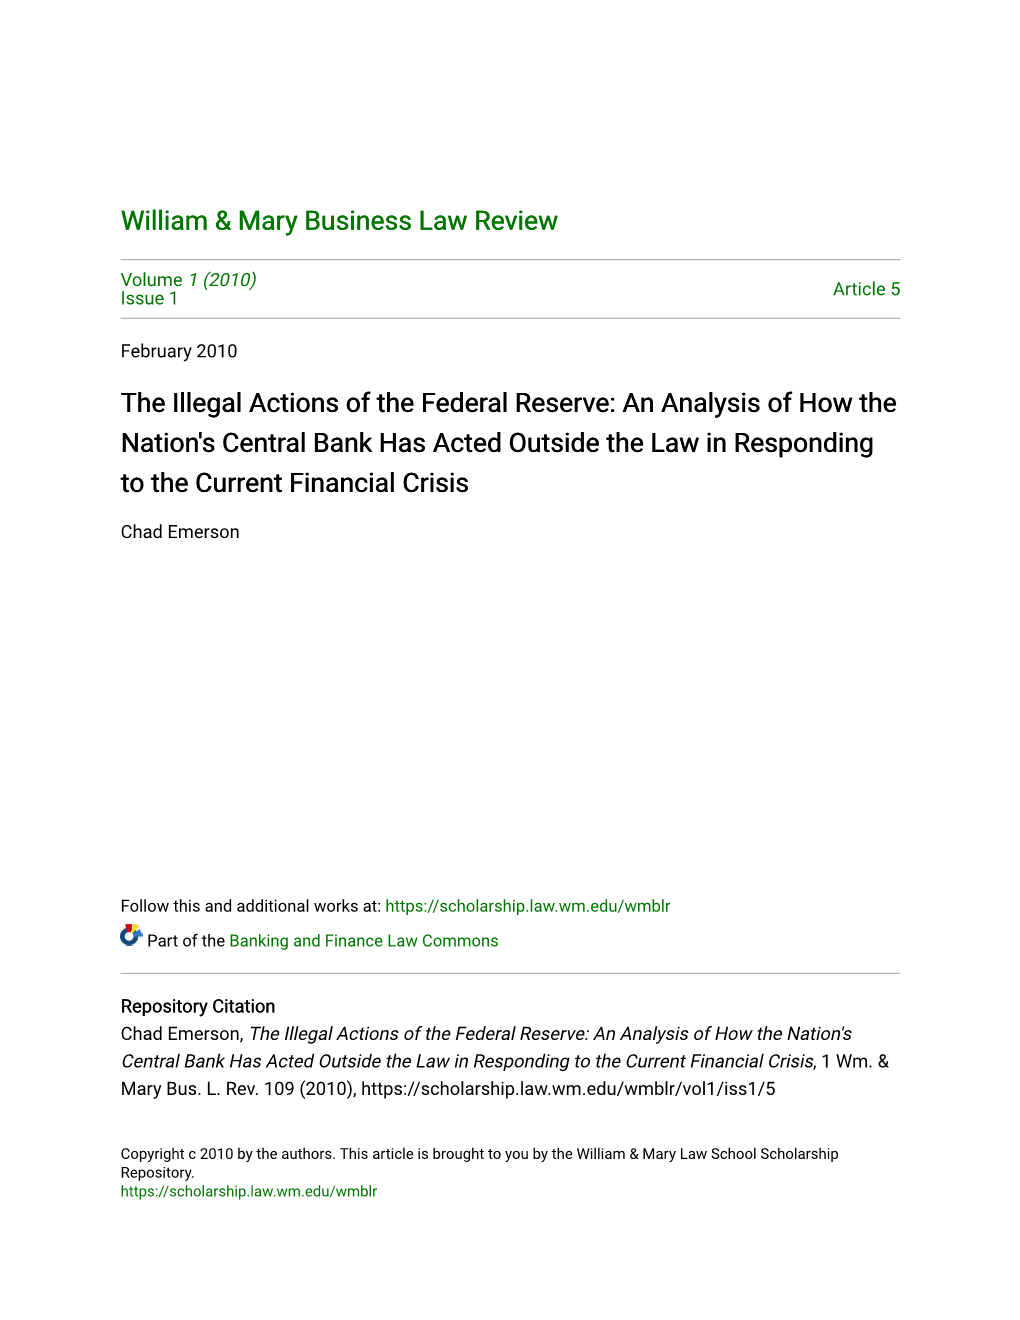 The Illegal Actions of the Federal Reserve: an Analysis of How the Nation's Central Bank Has Acted Outside the Law in Responding to the Current Financial Crisis